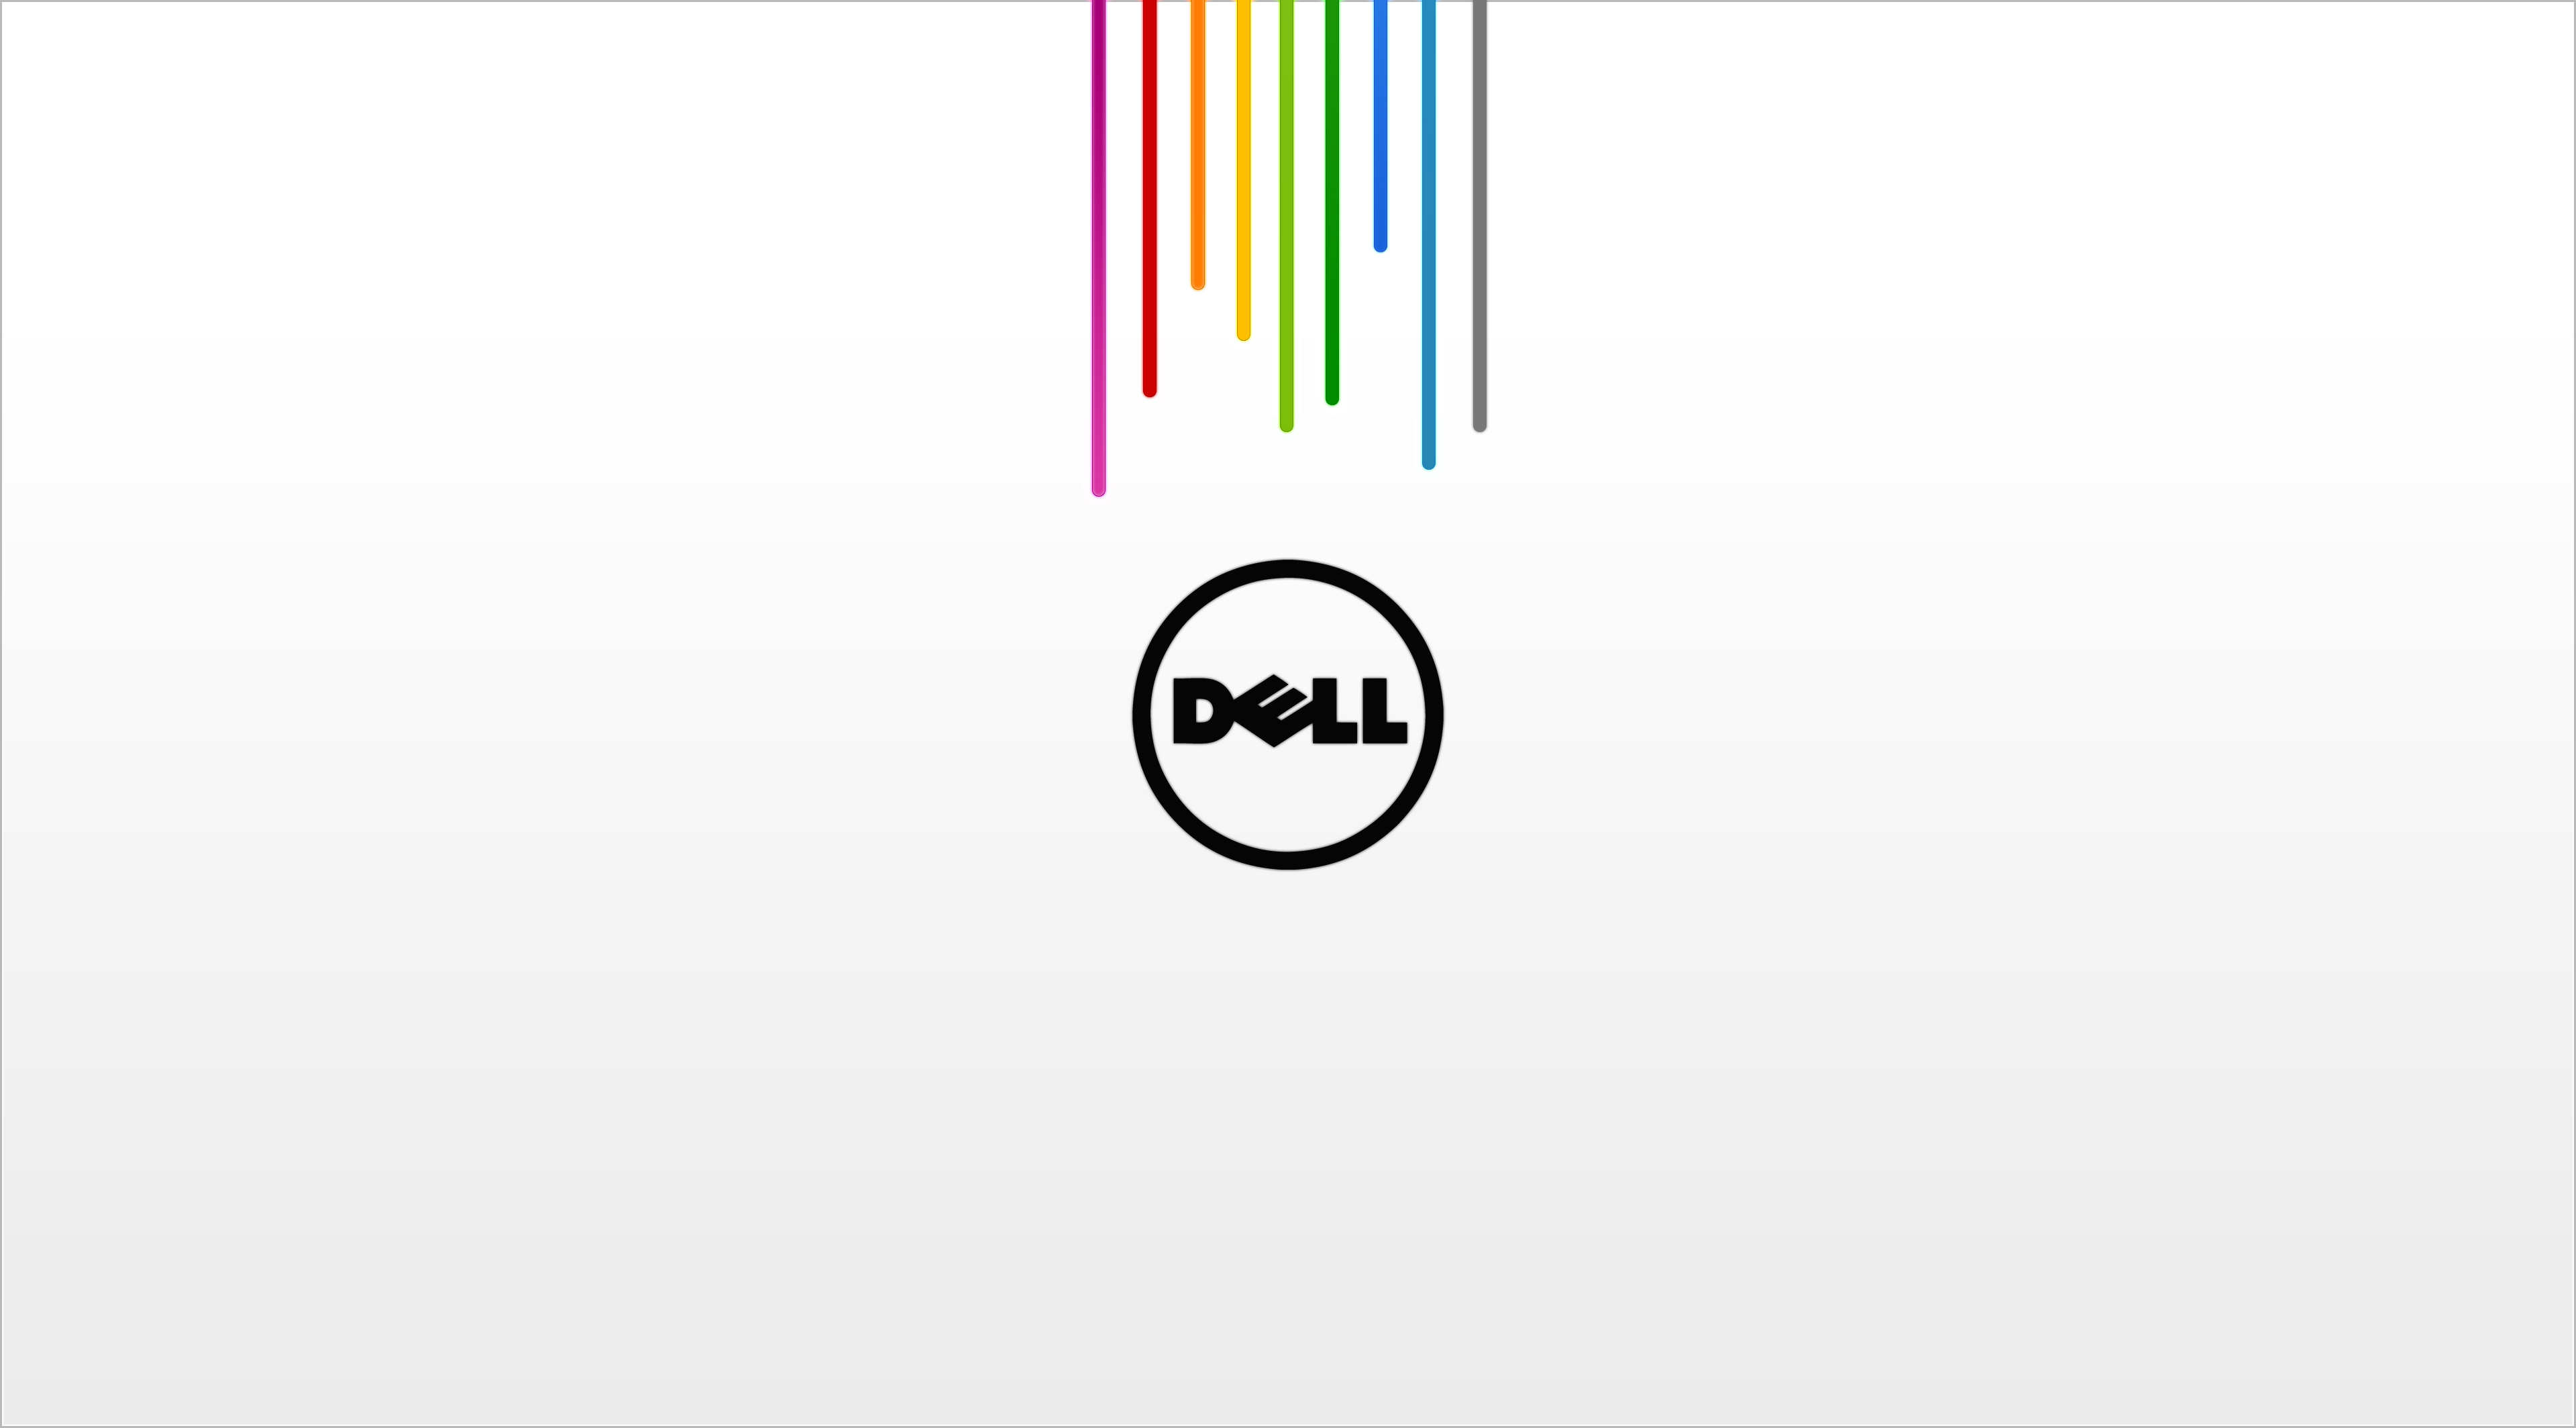 dell, technology